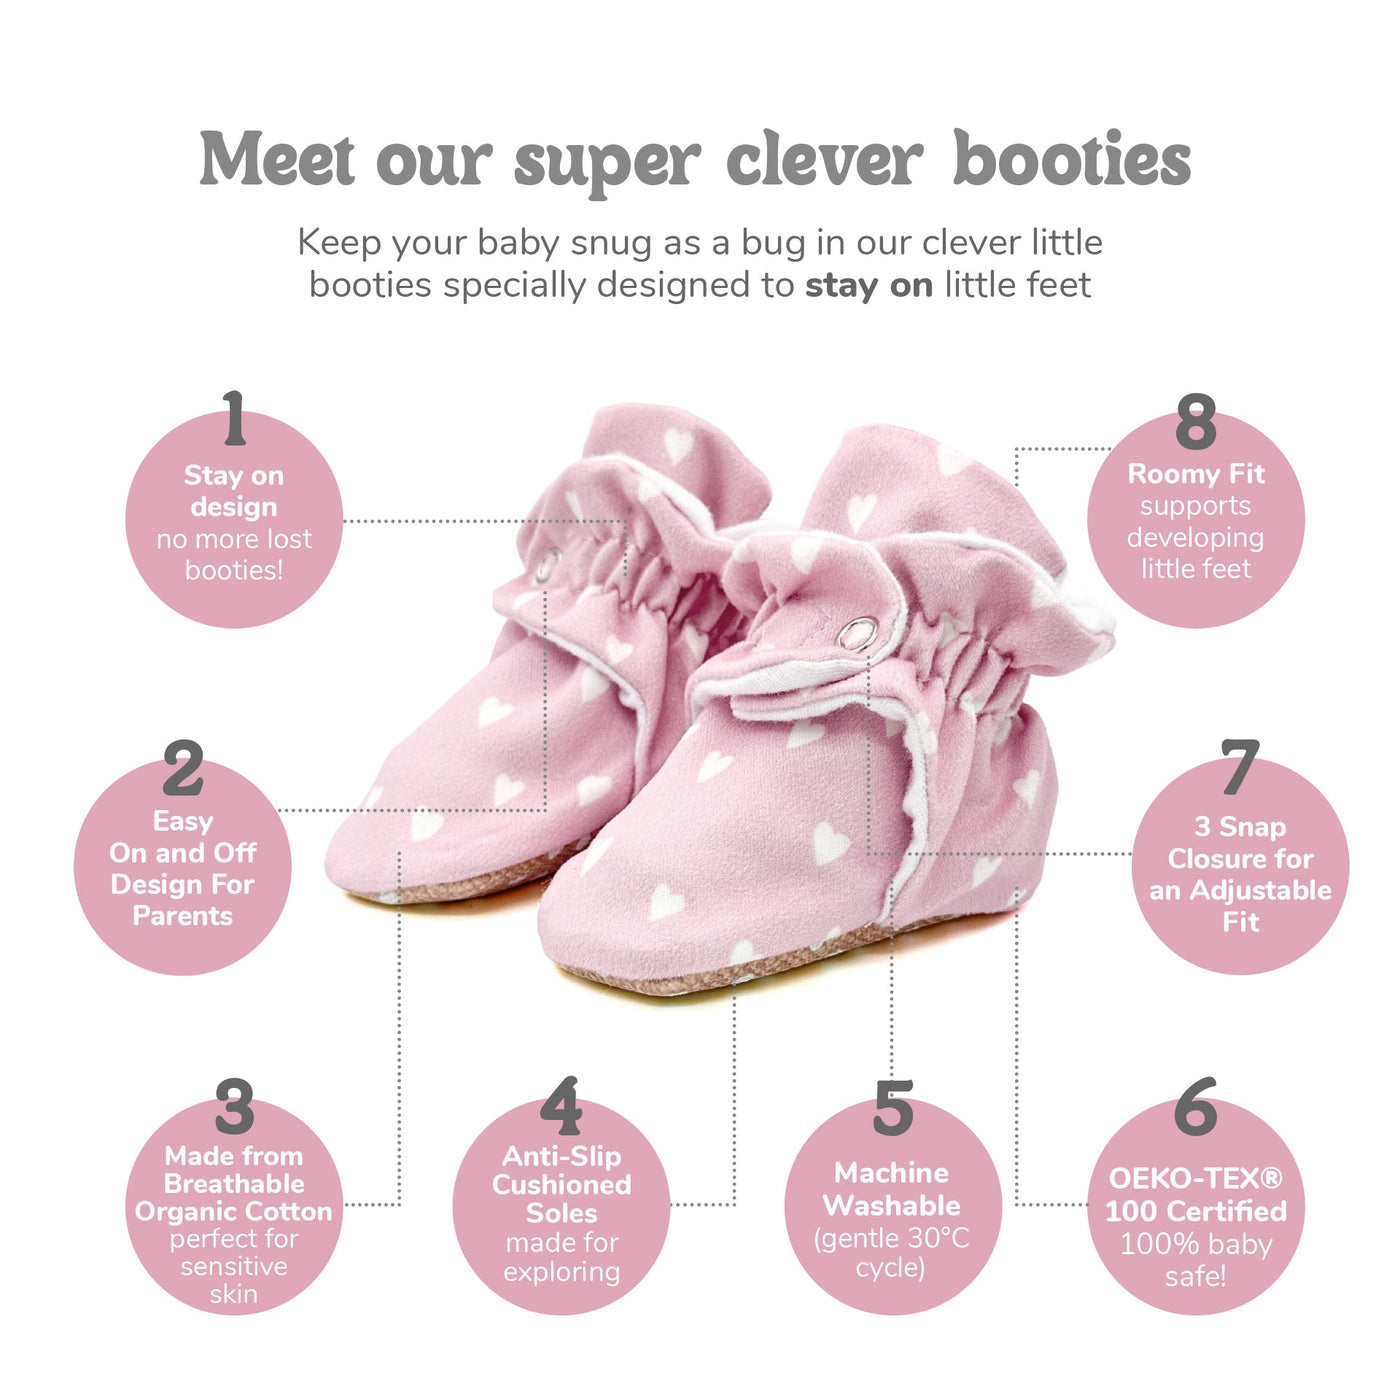 Snugabugz Stay On Non Slip Booties Infographic with details of the Bootie features including the stay on design, organic cotton, non slip soles, 3 popper closure, easy on design for parents and machine washable. 